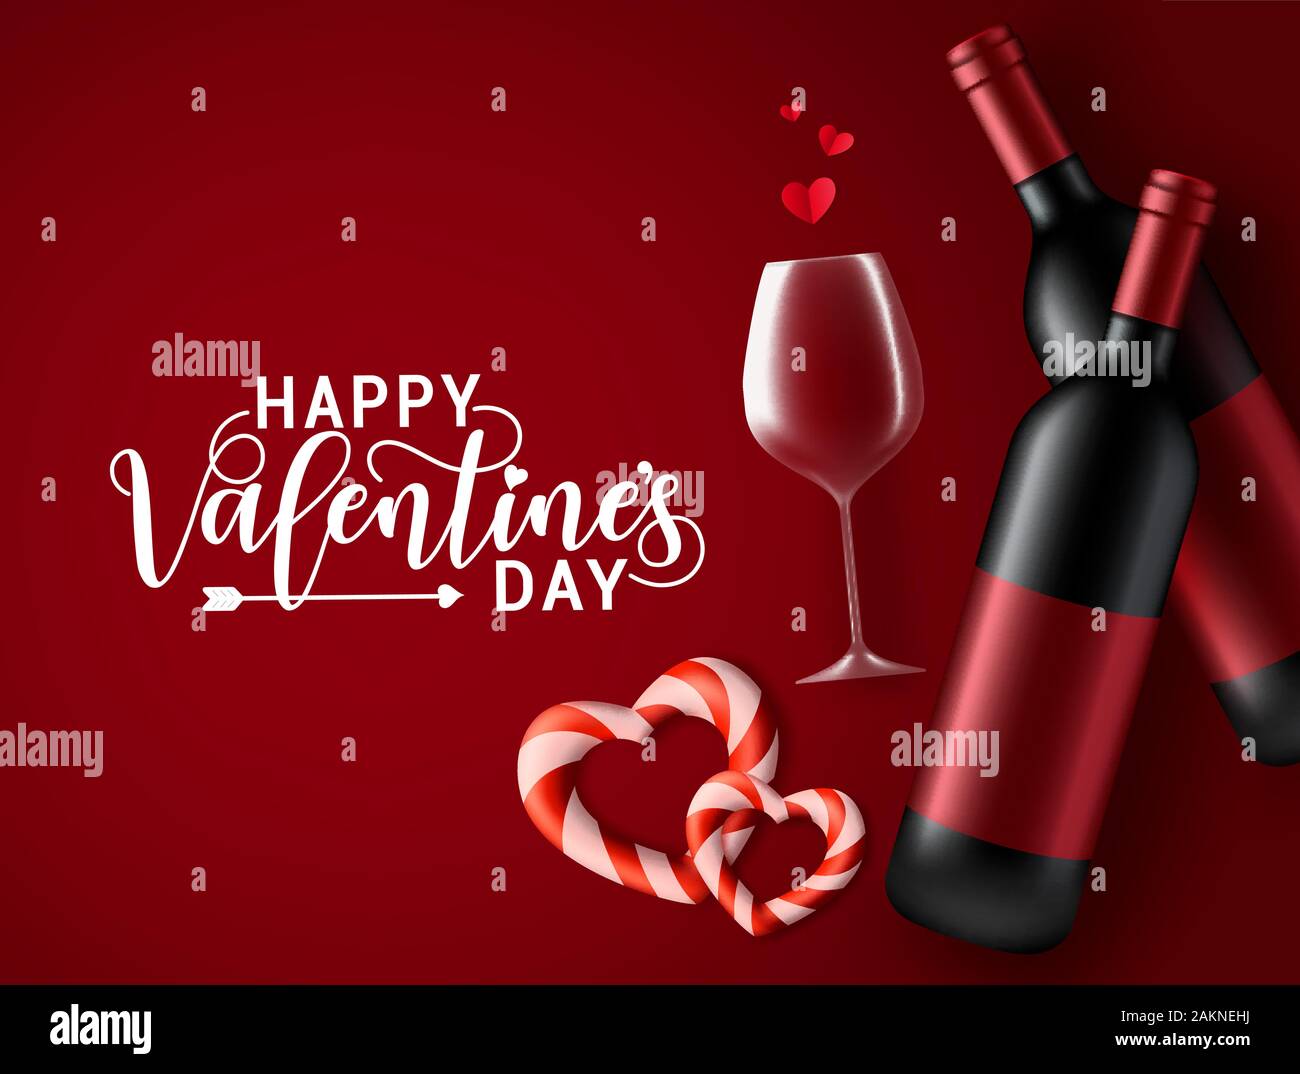 Valentines date with wine vector background. Happy valentines day greeting text with valentine dating element of champagne, wine glass, and heart. Stock Vector